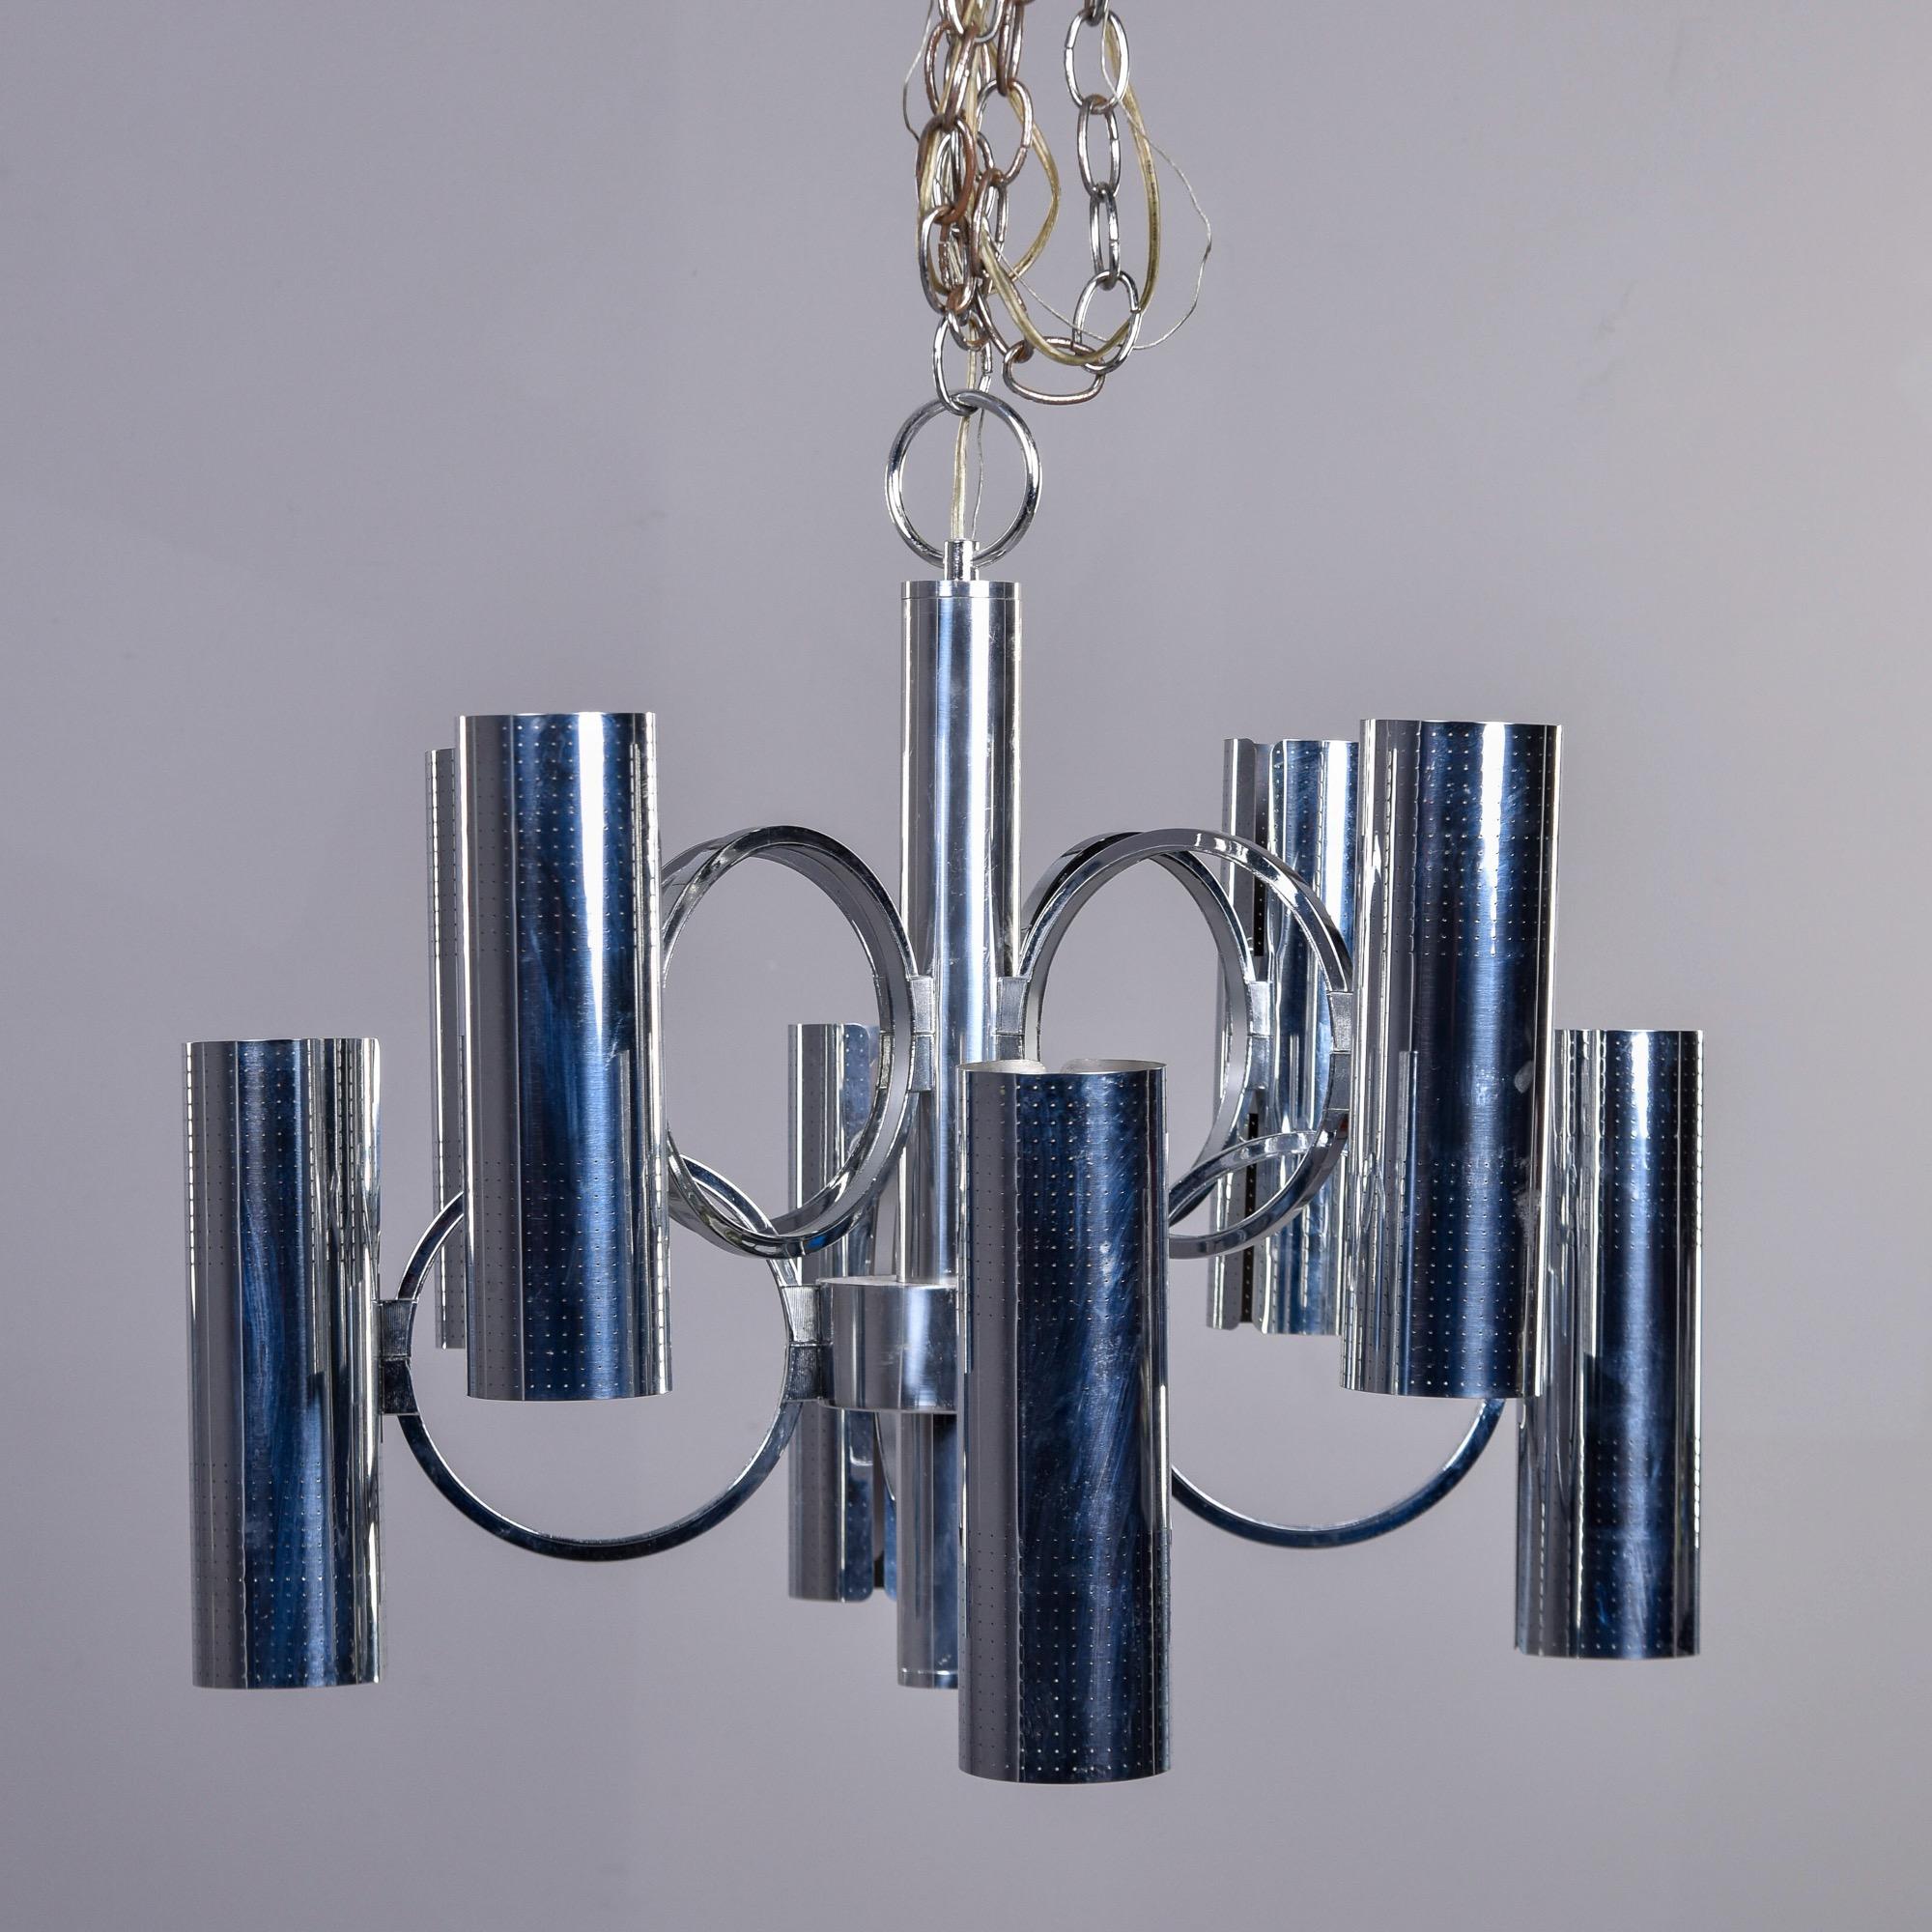 Circa 1970s chandelier in chrome by Italian designer Gaetano Sciolari for Lightolier. Each of this fixture’s eight arms has an uplight and downlight and standard sized sockets for a total of 16 lights. The chrome shades are pierced and attached to